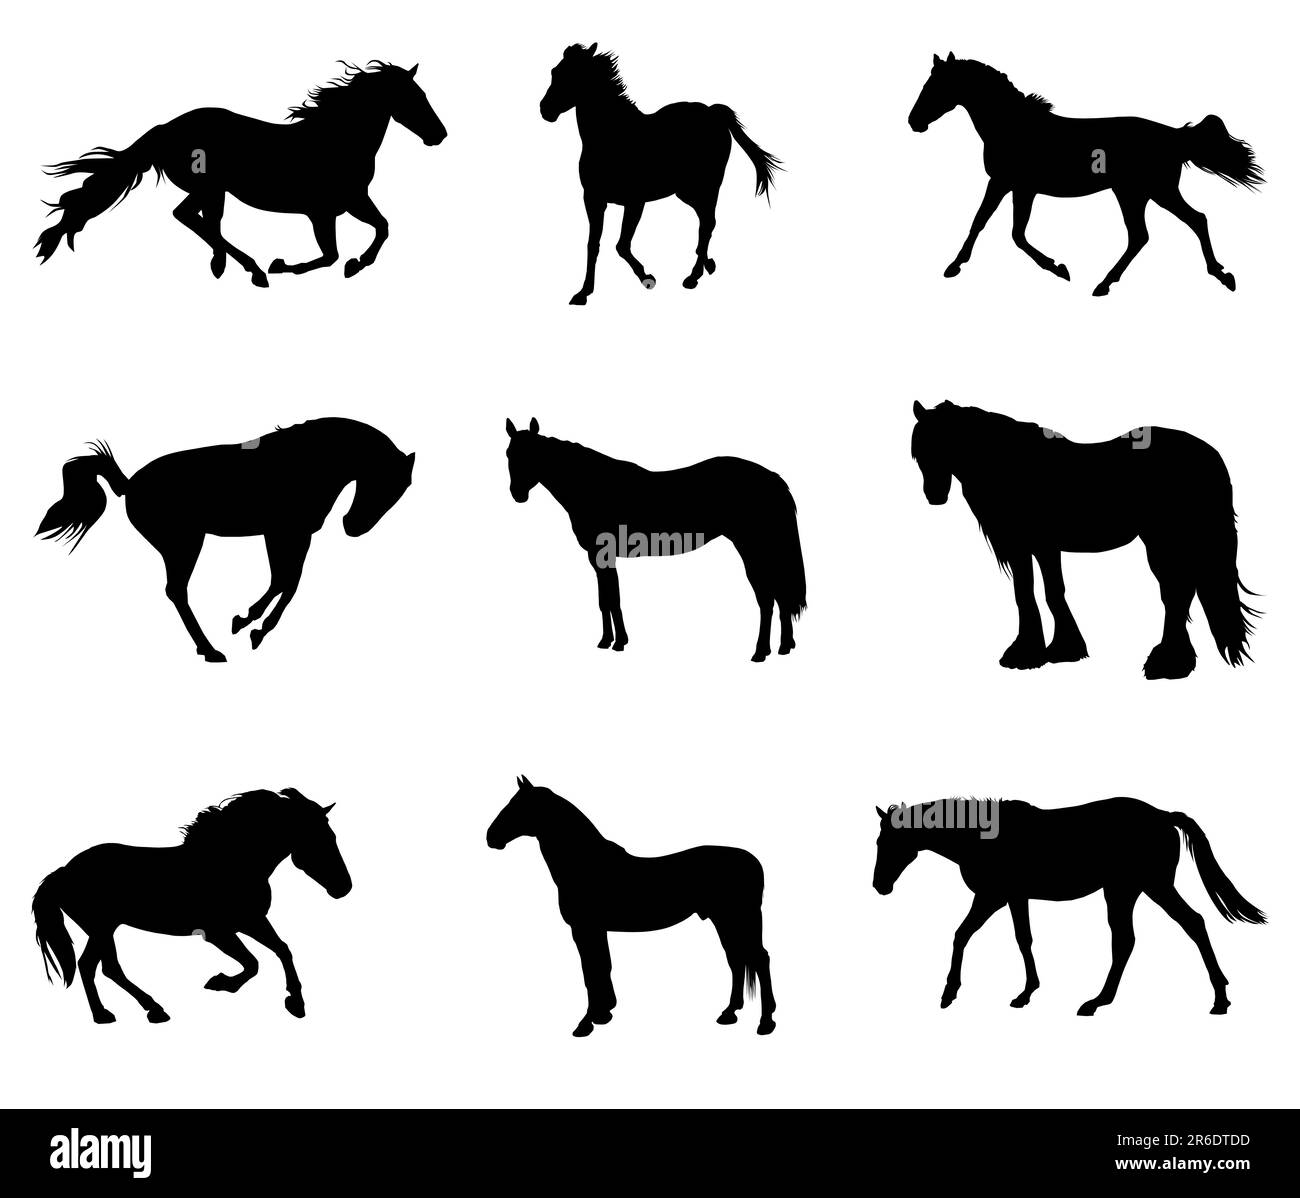 collection of horse silhouettes Stock Vector